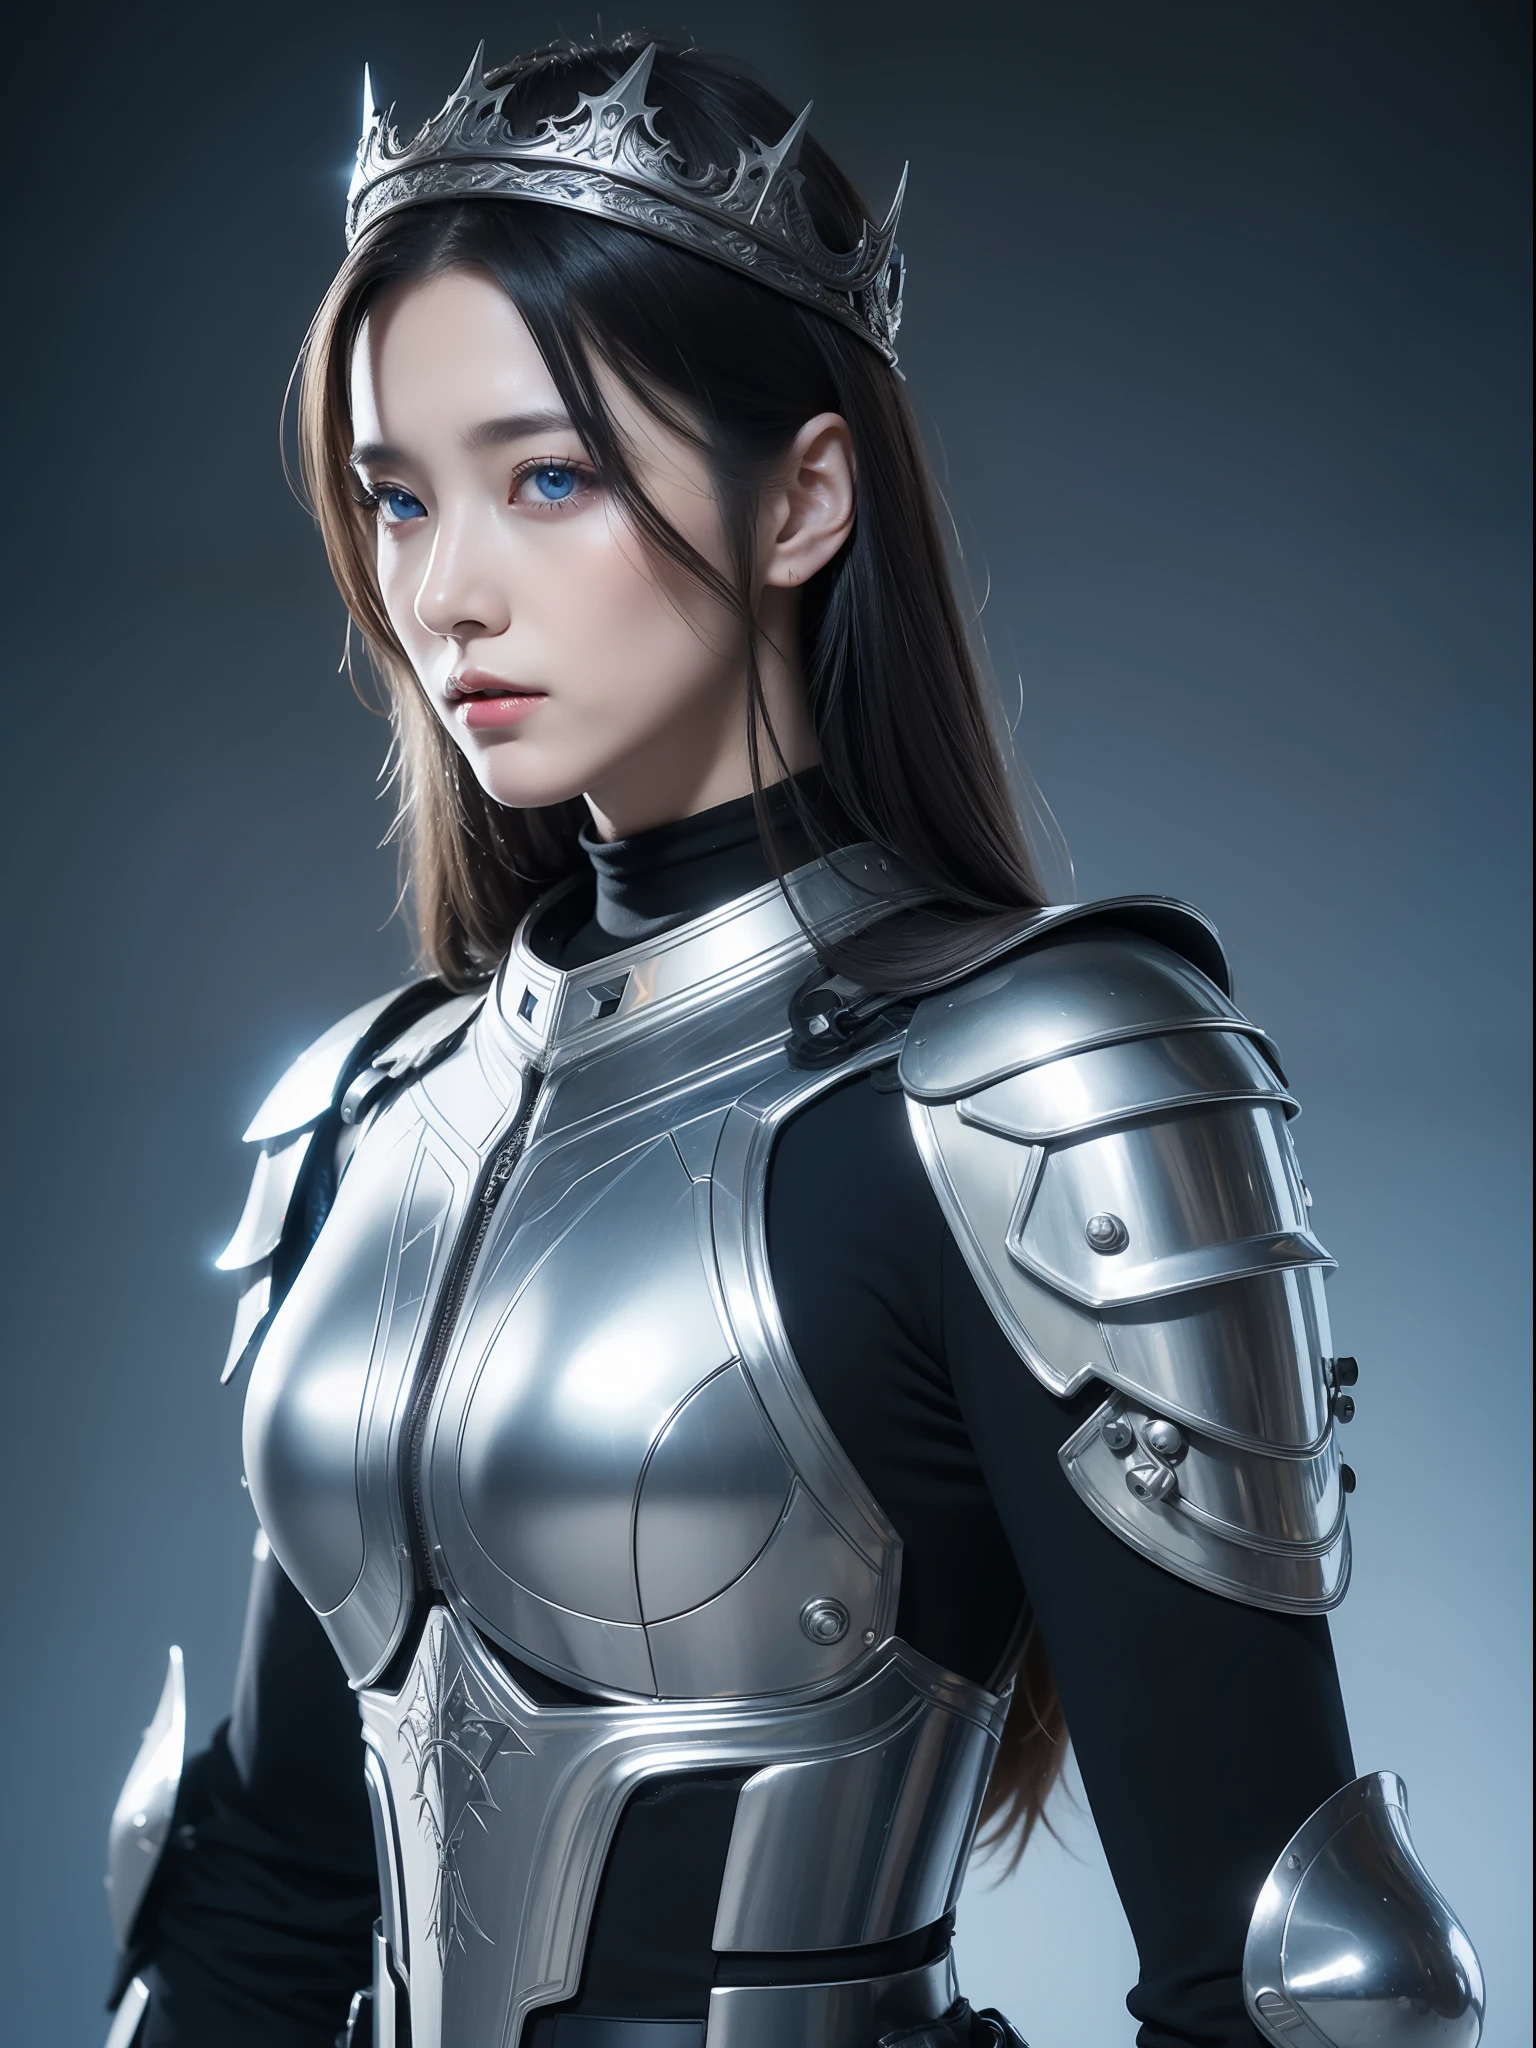 Masterpiece, Best quality, high resolution, 8K, Portrait, Realistic photo,（ Combine clothing with Korean fashion design），Digital photography, full bodyesbian, 1 16-year-old girl, (Cyborg), Beautiful blue-gray gradient long hair, Blue eyes, Intricate, elegant, Highly detailed, The crown of evil, Black dress, ,Silver metal exoskeleton armor, Intricate knightly hollow armor,power armour, Openwork design, mechanical structure, Photo pose, Solemn,, Red lips, From the movie《Final Fantasy XV》.Metallic texture, oc rendered，Reflective texture, ((Clothing cutting)), ((Set against the backdrop of the castle and the giant Moster))